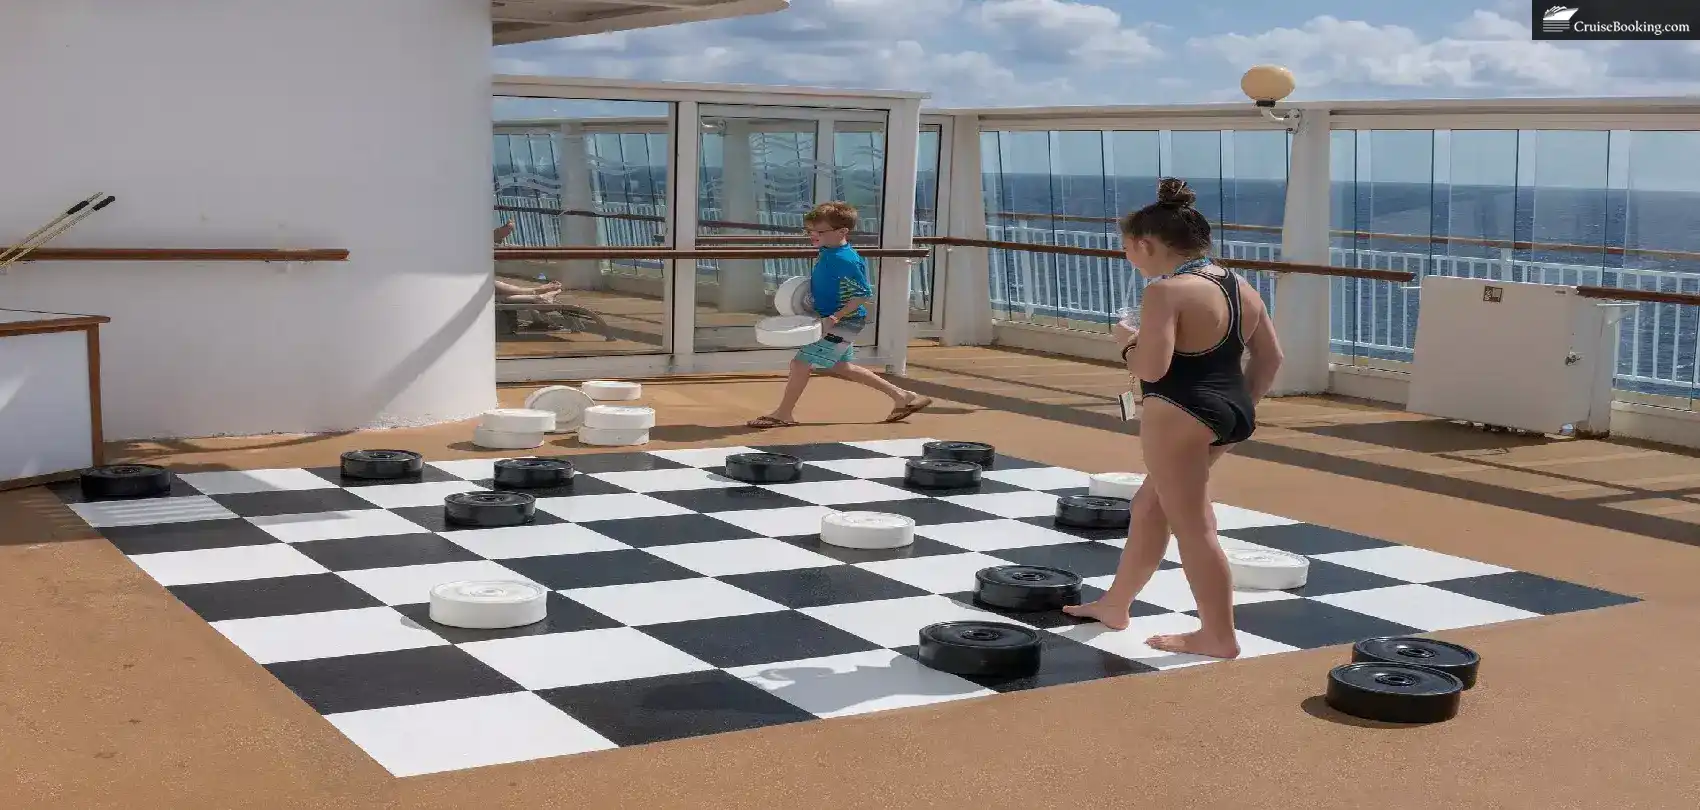 Kids Playing on a Cruise